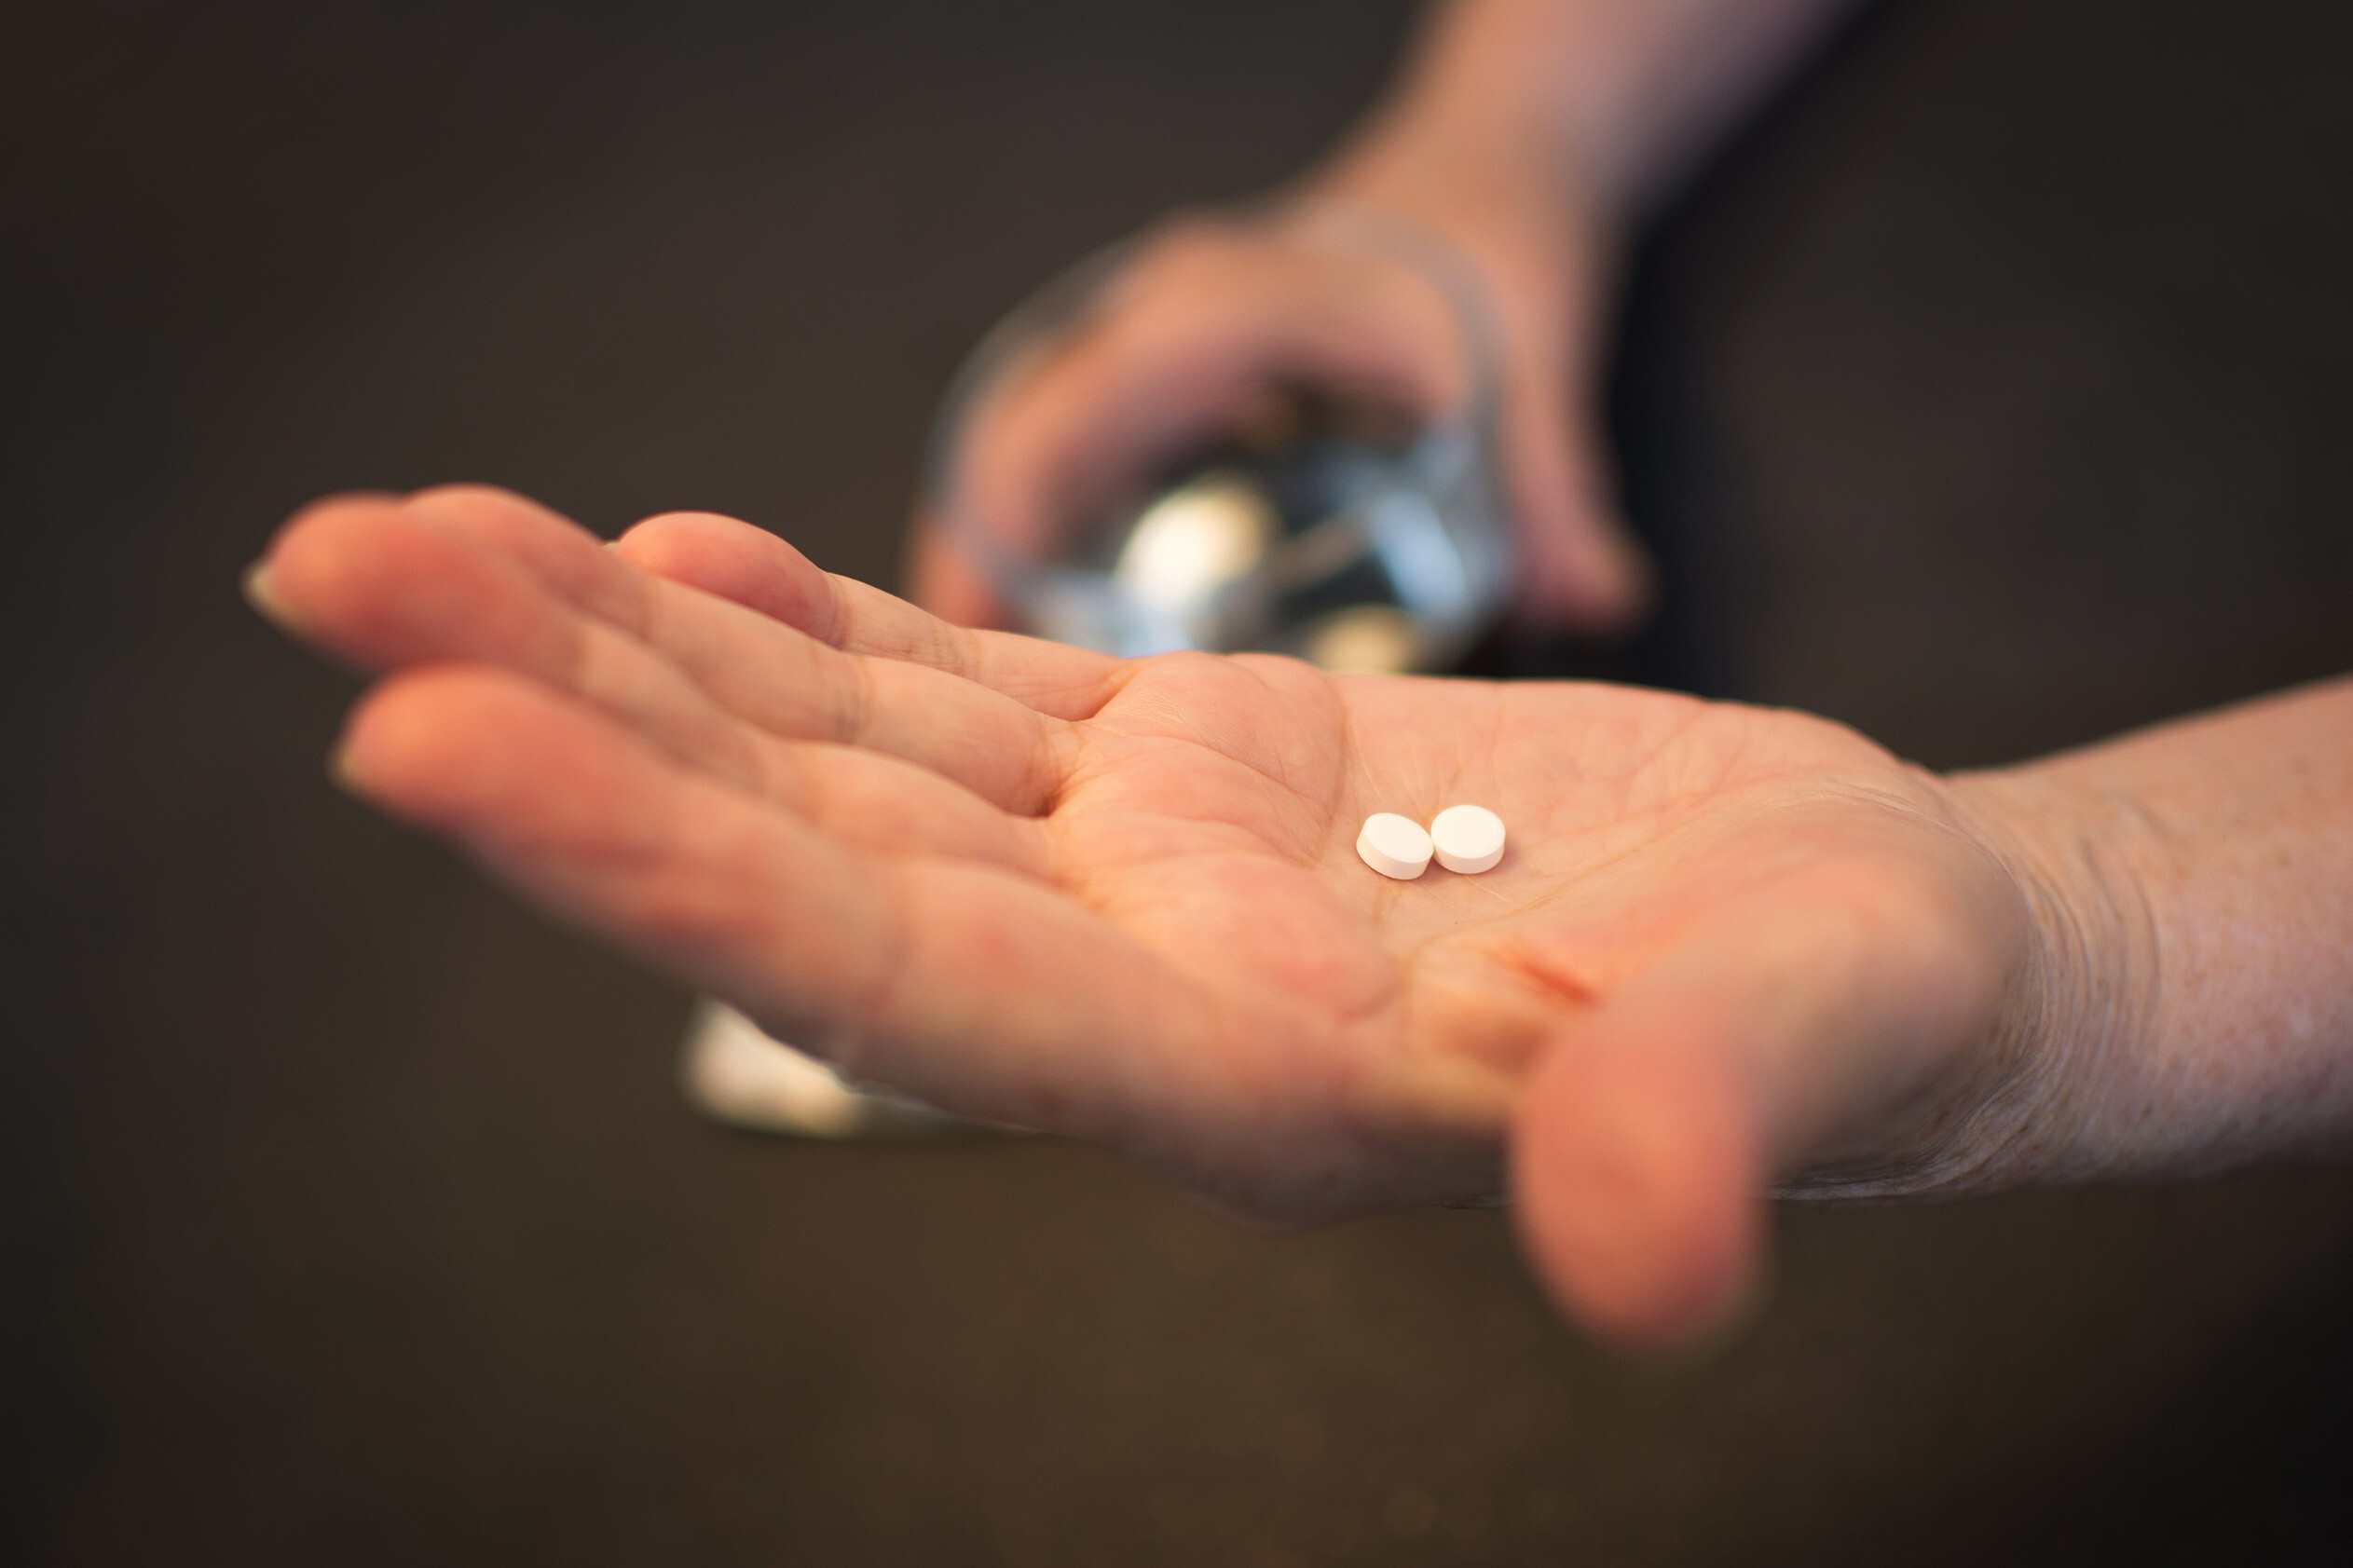 Taking aspirin twice a week can lower risk of cancers of the digestive system. Photo: Shutterstock